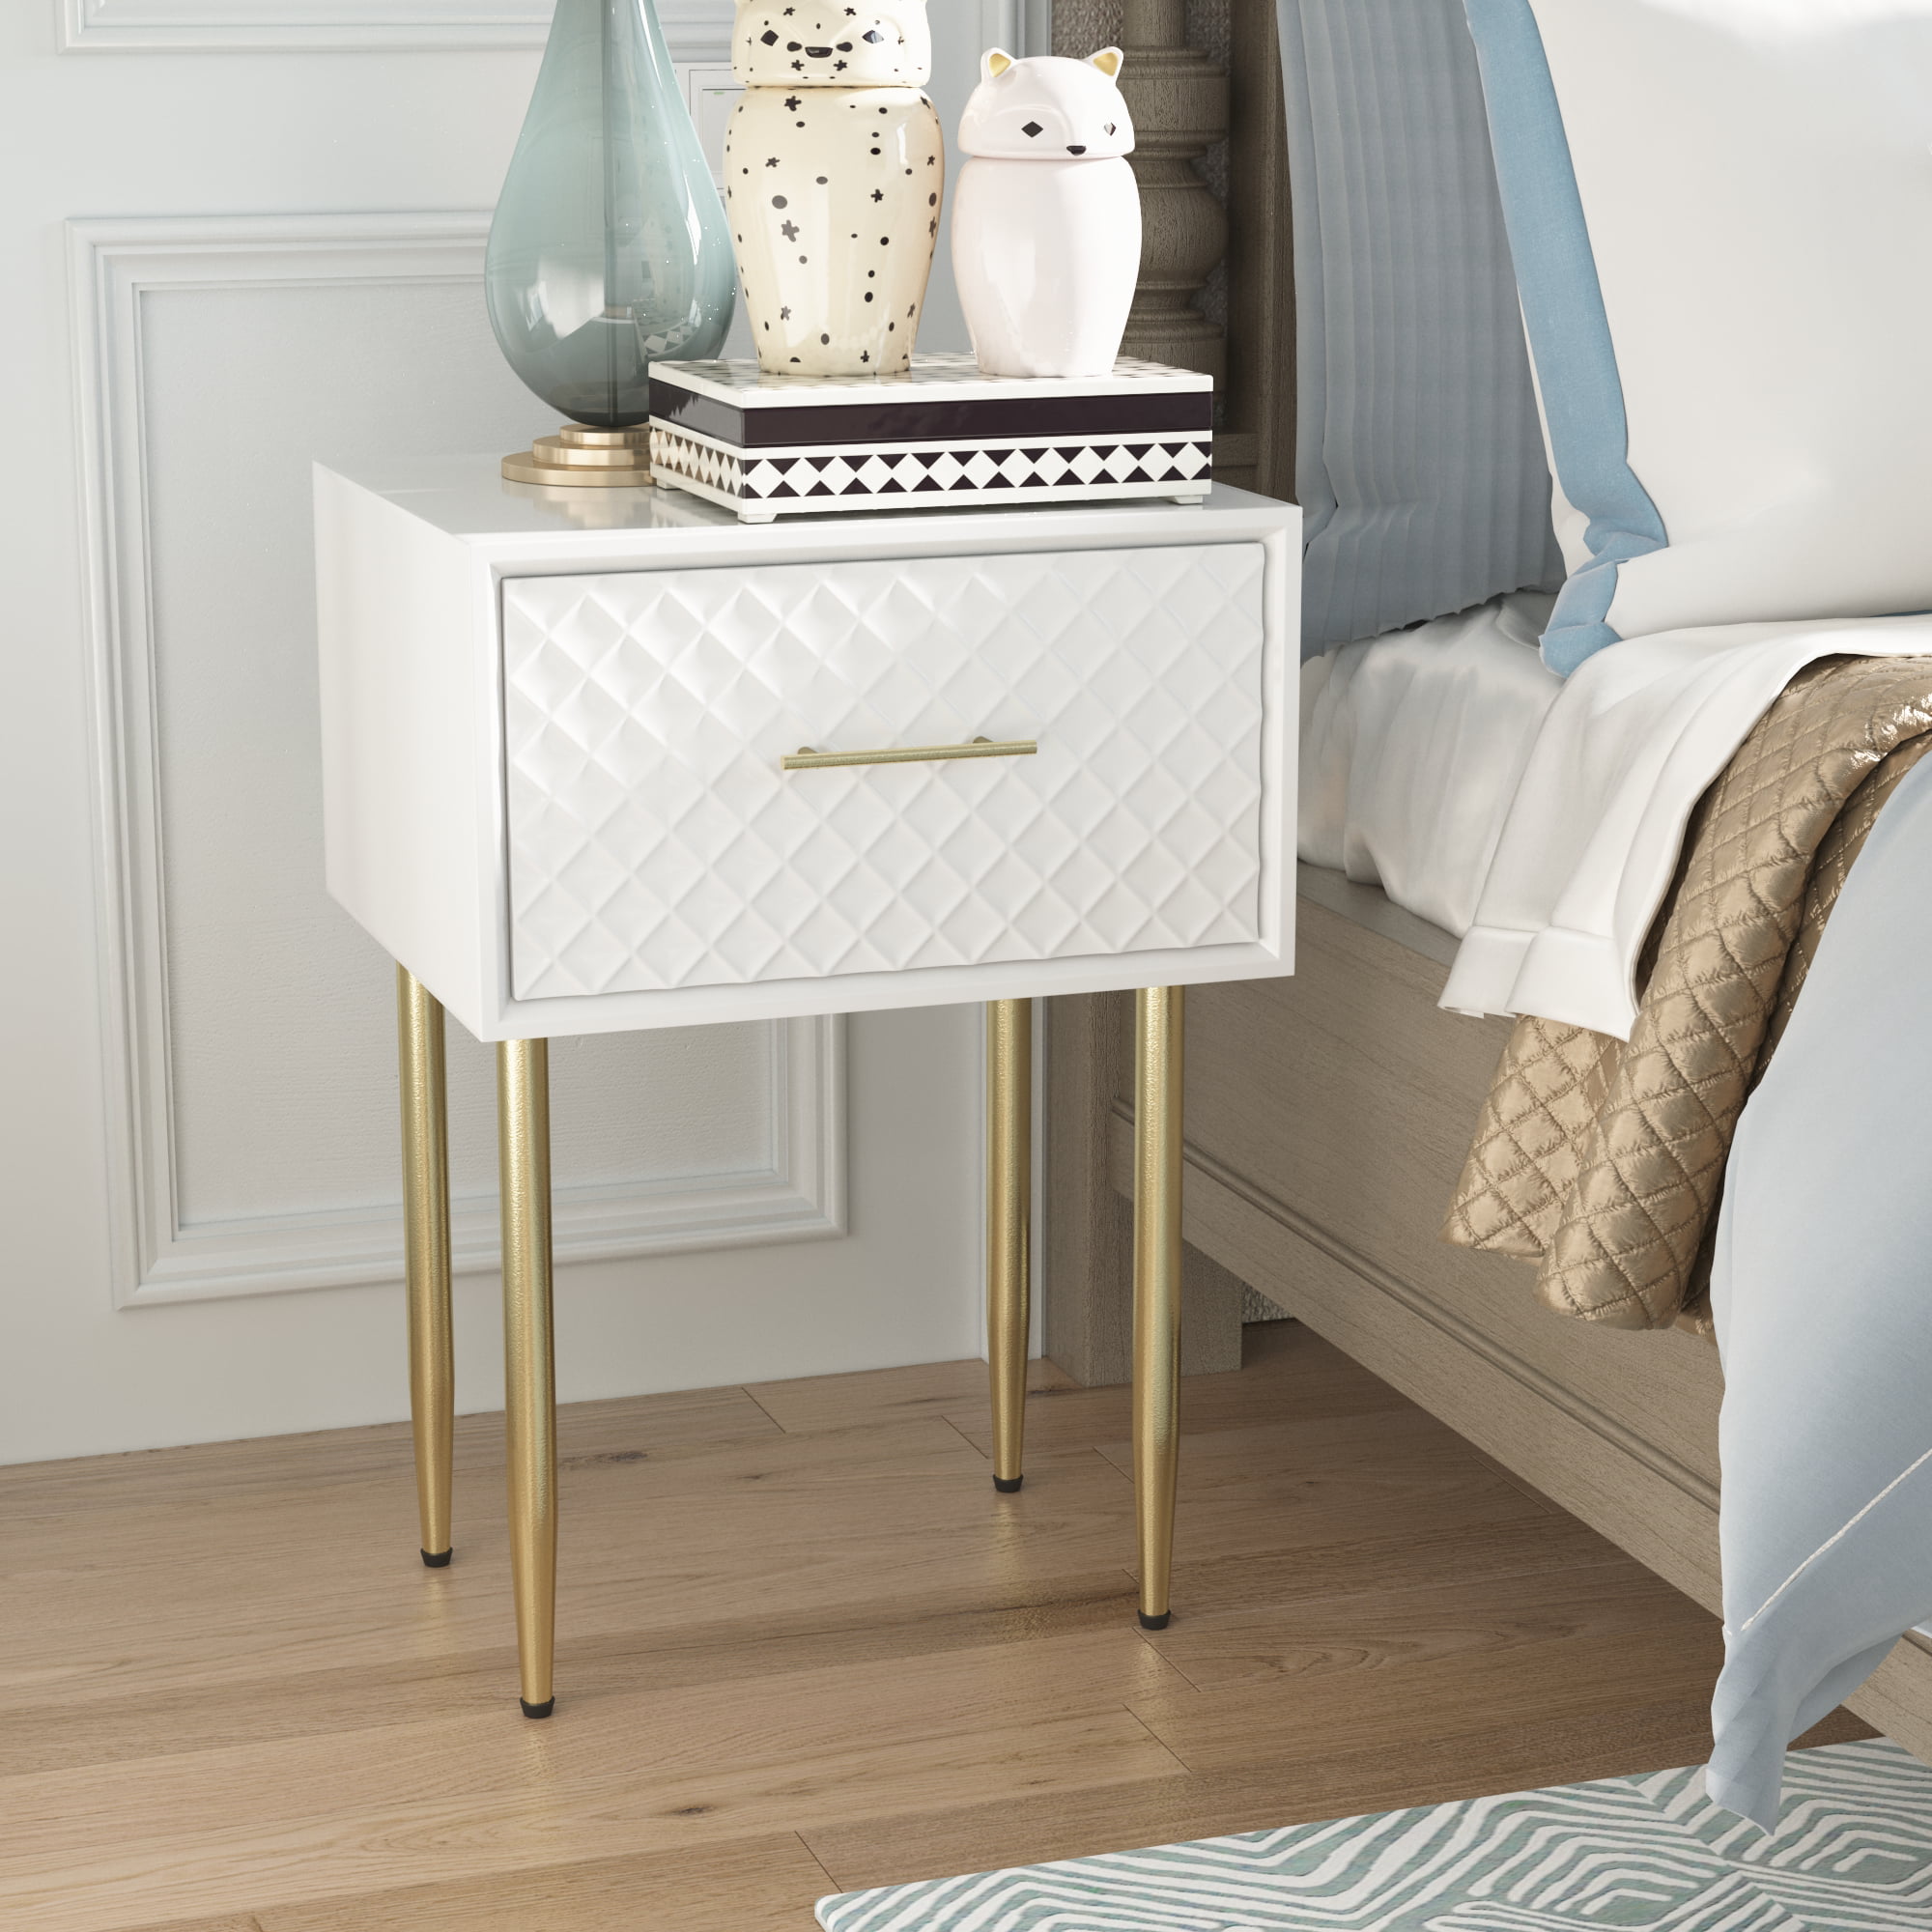 Clean-Lined Modern Style COZAYH Full-Assembled Large Drawer Nightstand Side Table